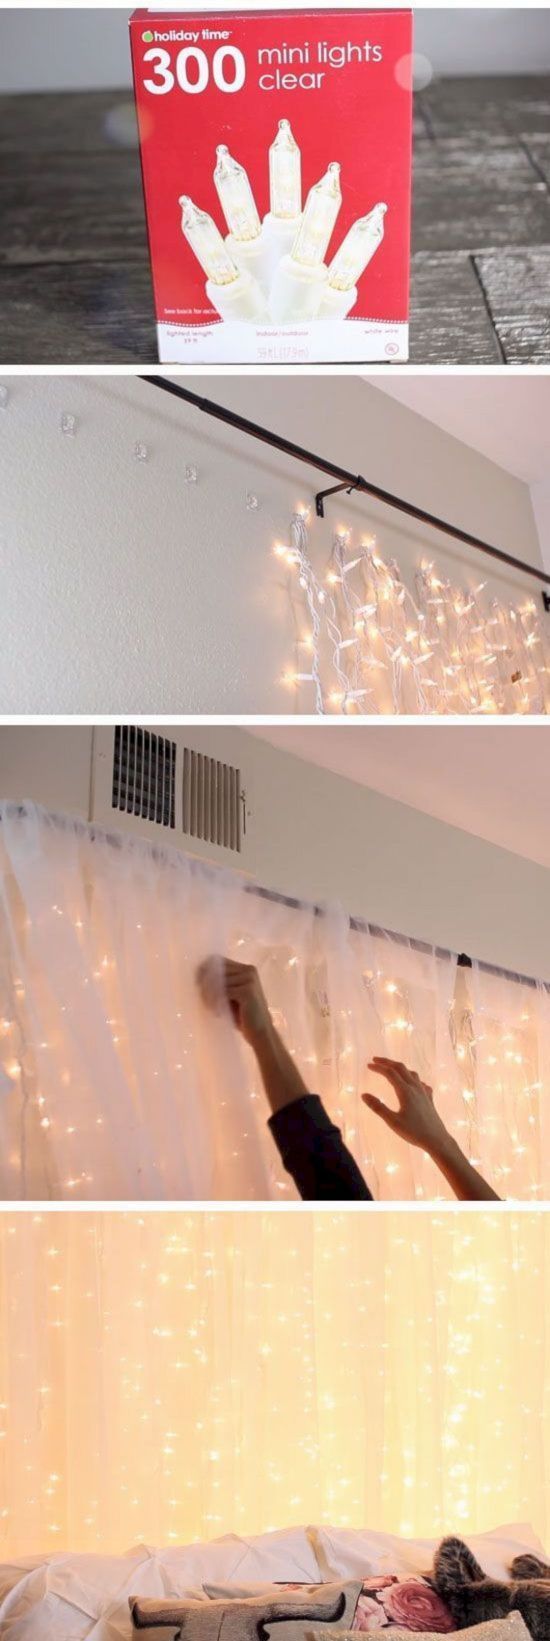 10 Cute DIY Ideas That Will Make Your Home Adorable -   18 room decor Easy awesome ideas